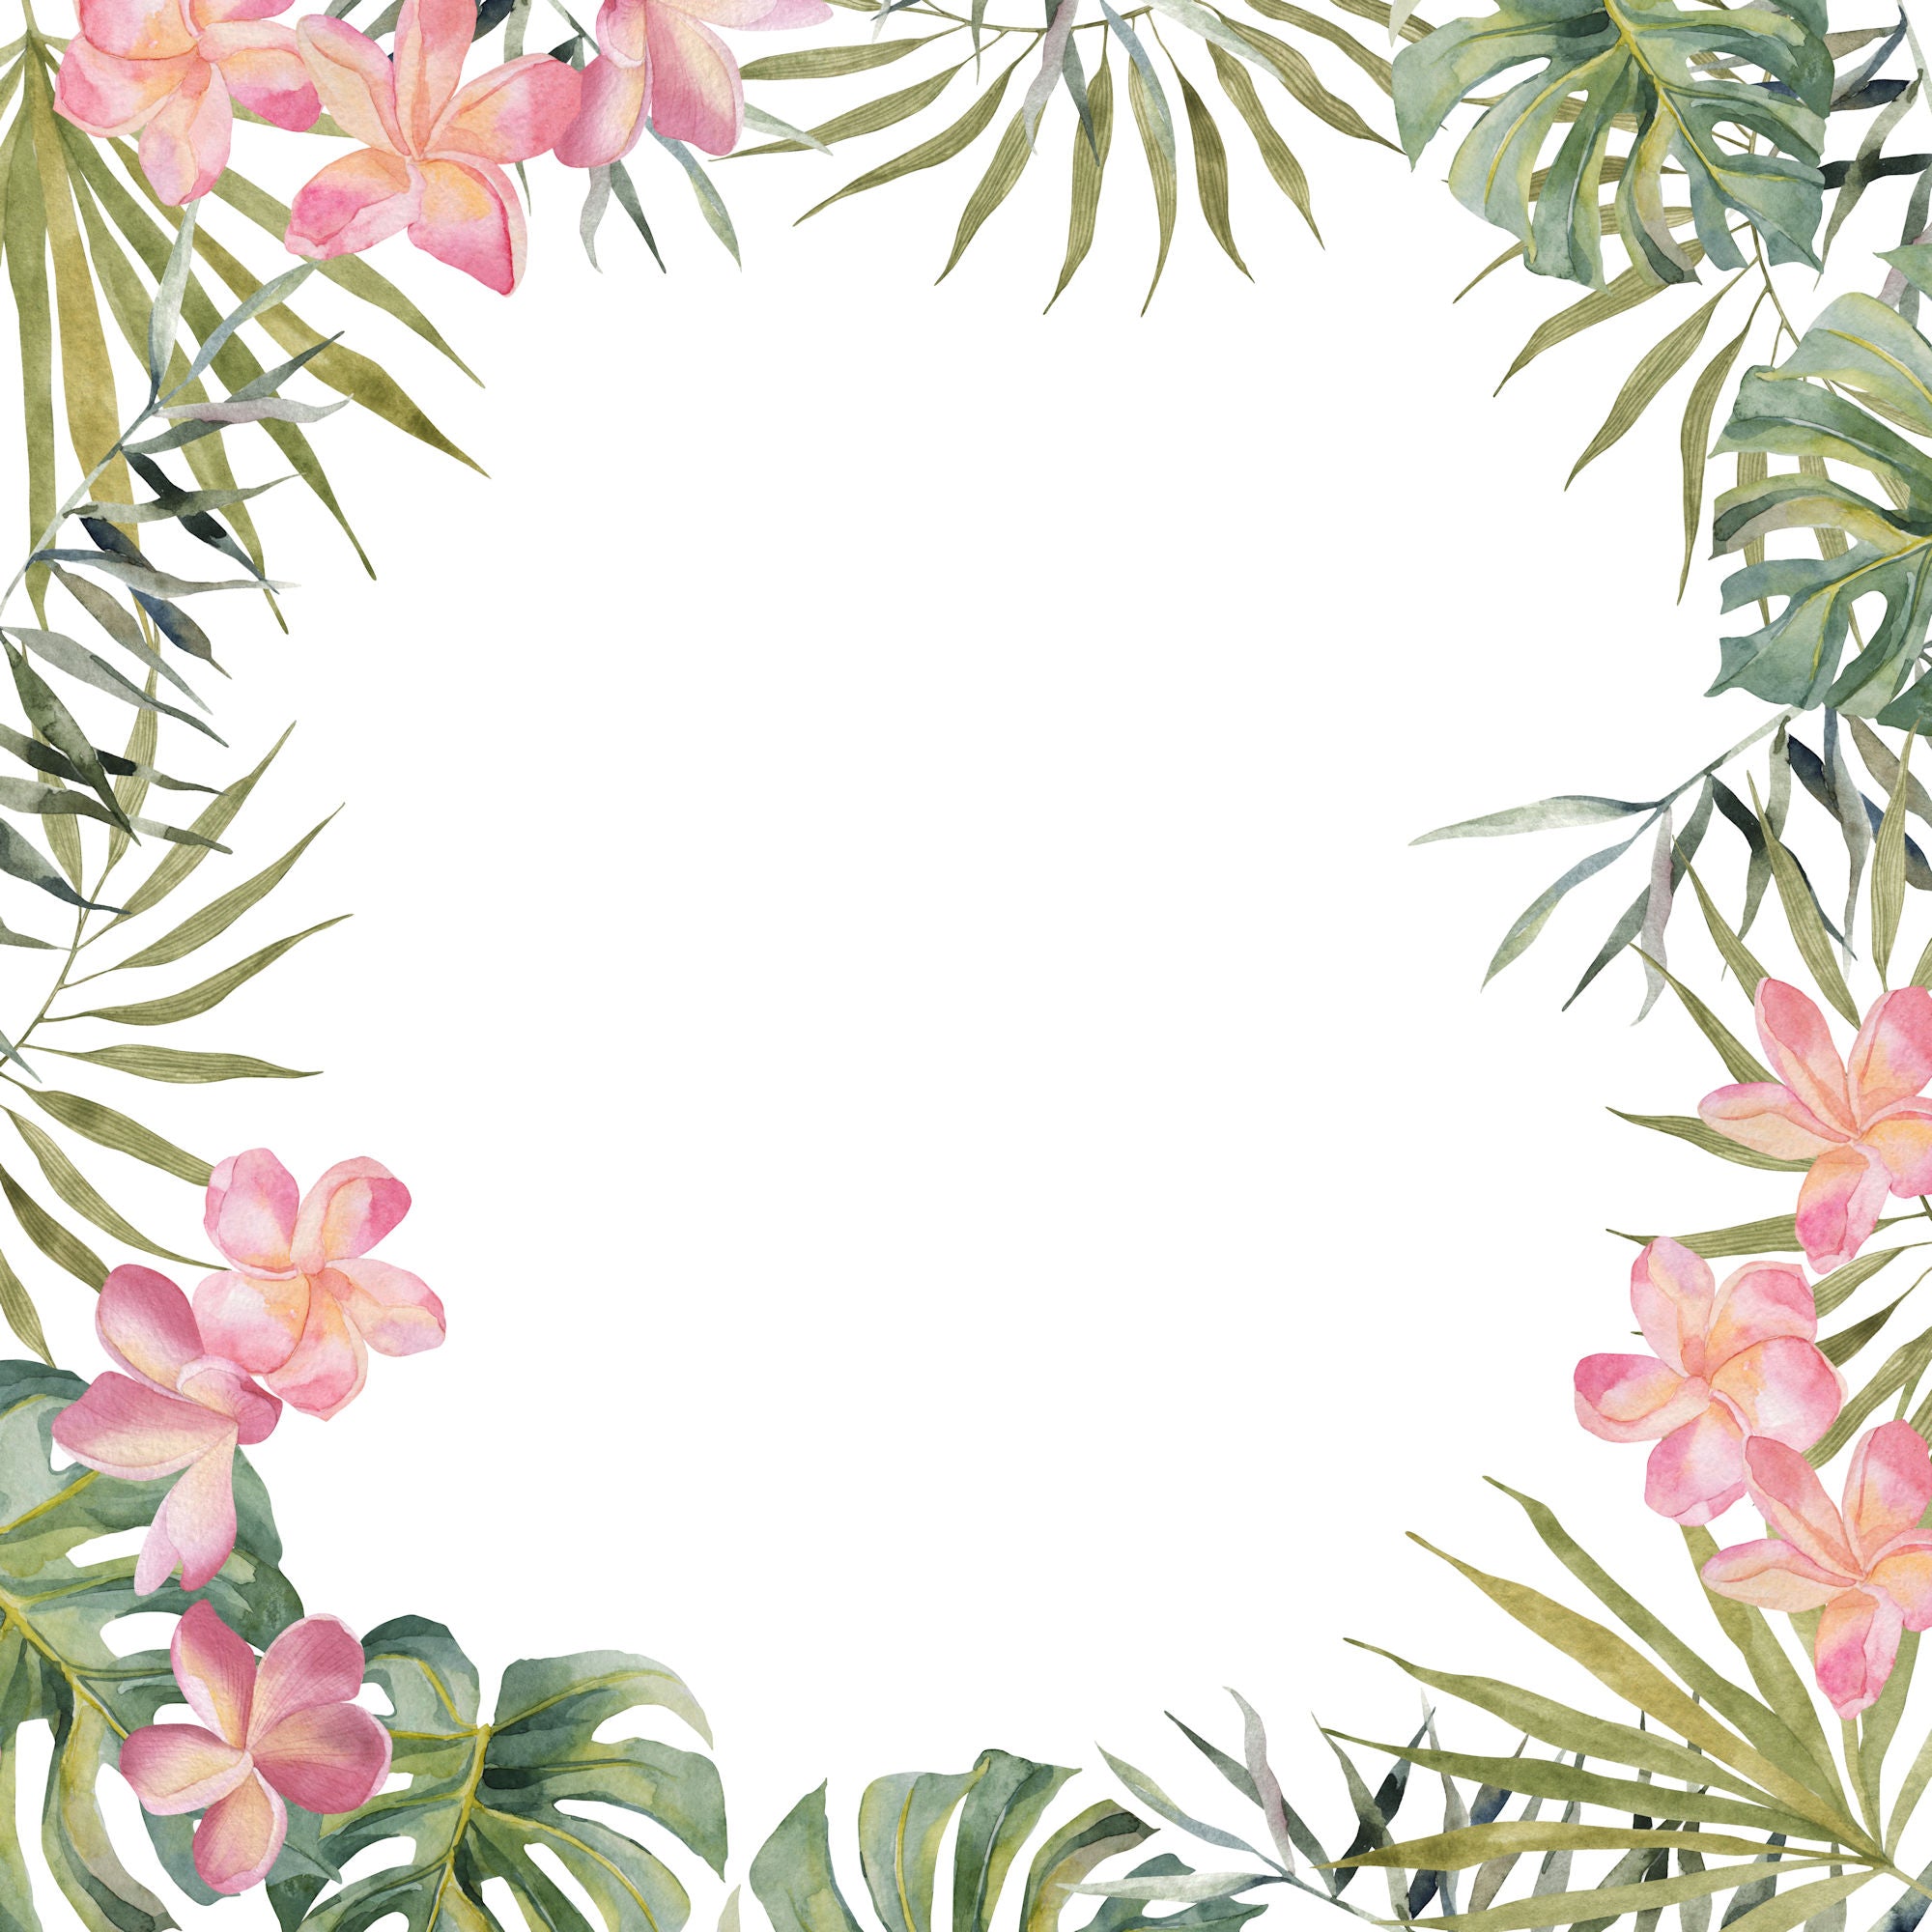 Tropical Paradise Collection Maui 12 x 12 Double-Sided Scrapbook Paper by SSC Designs